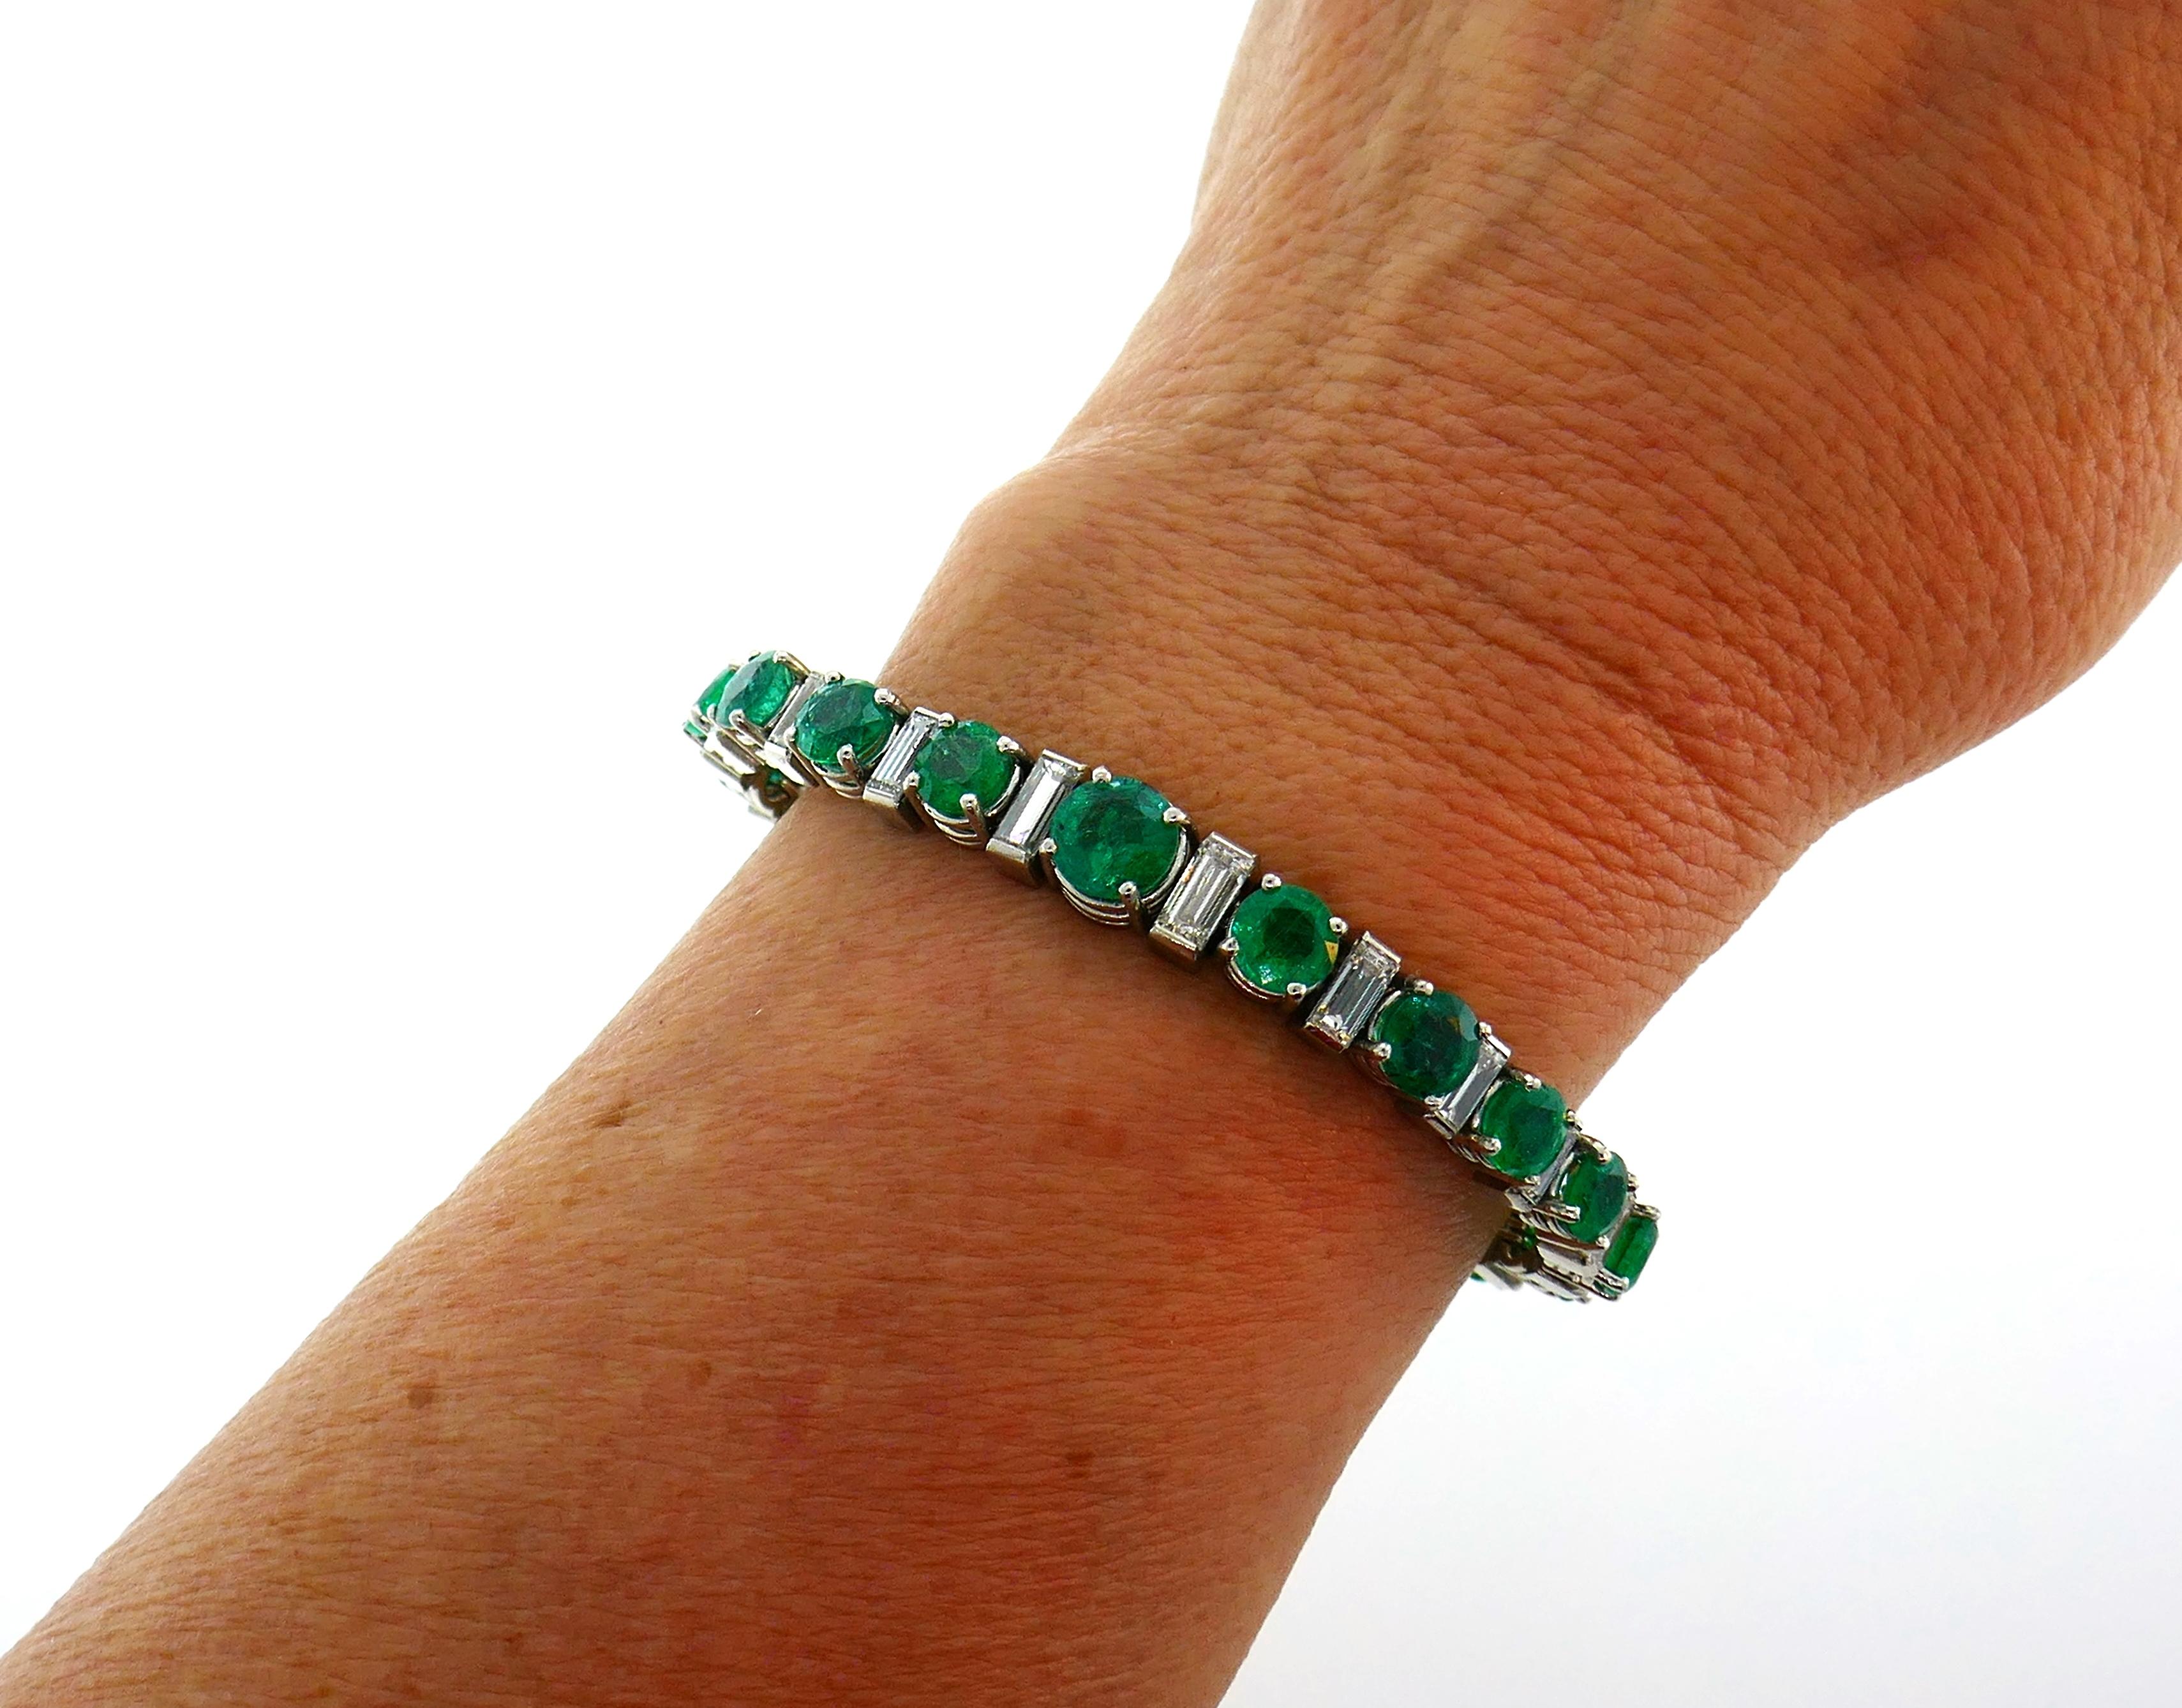 Stunning emerald and diamond platinum tennis bracelet created in France in the 1950s. Timeless and classy. Substantial on its own and great for piling up! Must have!
The bracelet designed as a graduating line featuring nineteen round faceted